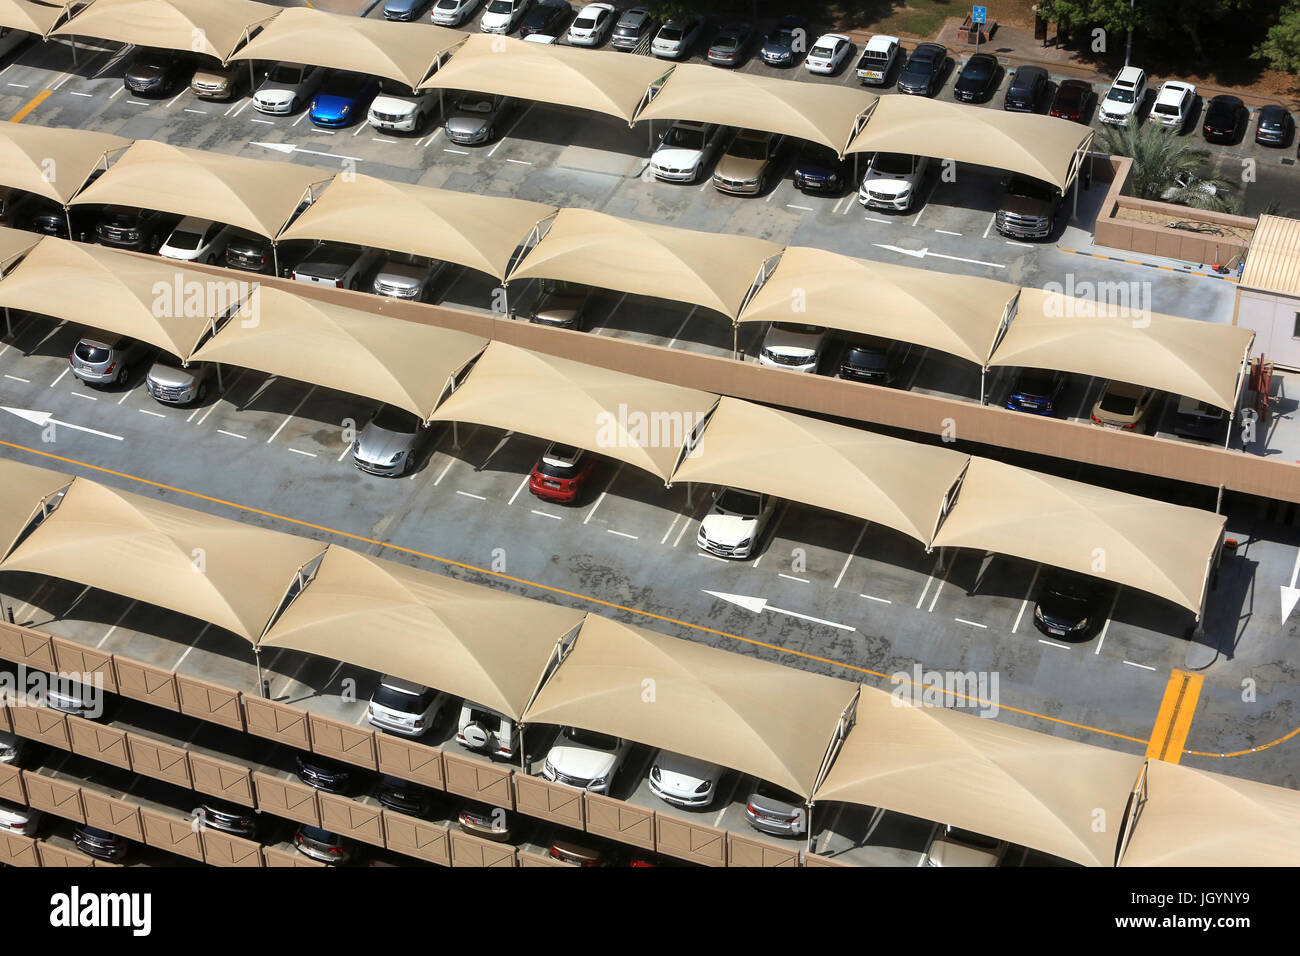 Parking on several floors. Emirate of Abu Dhabi. Stock Photo